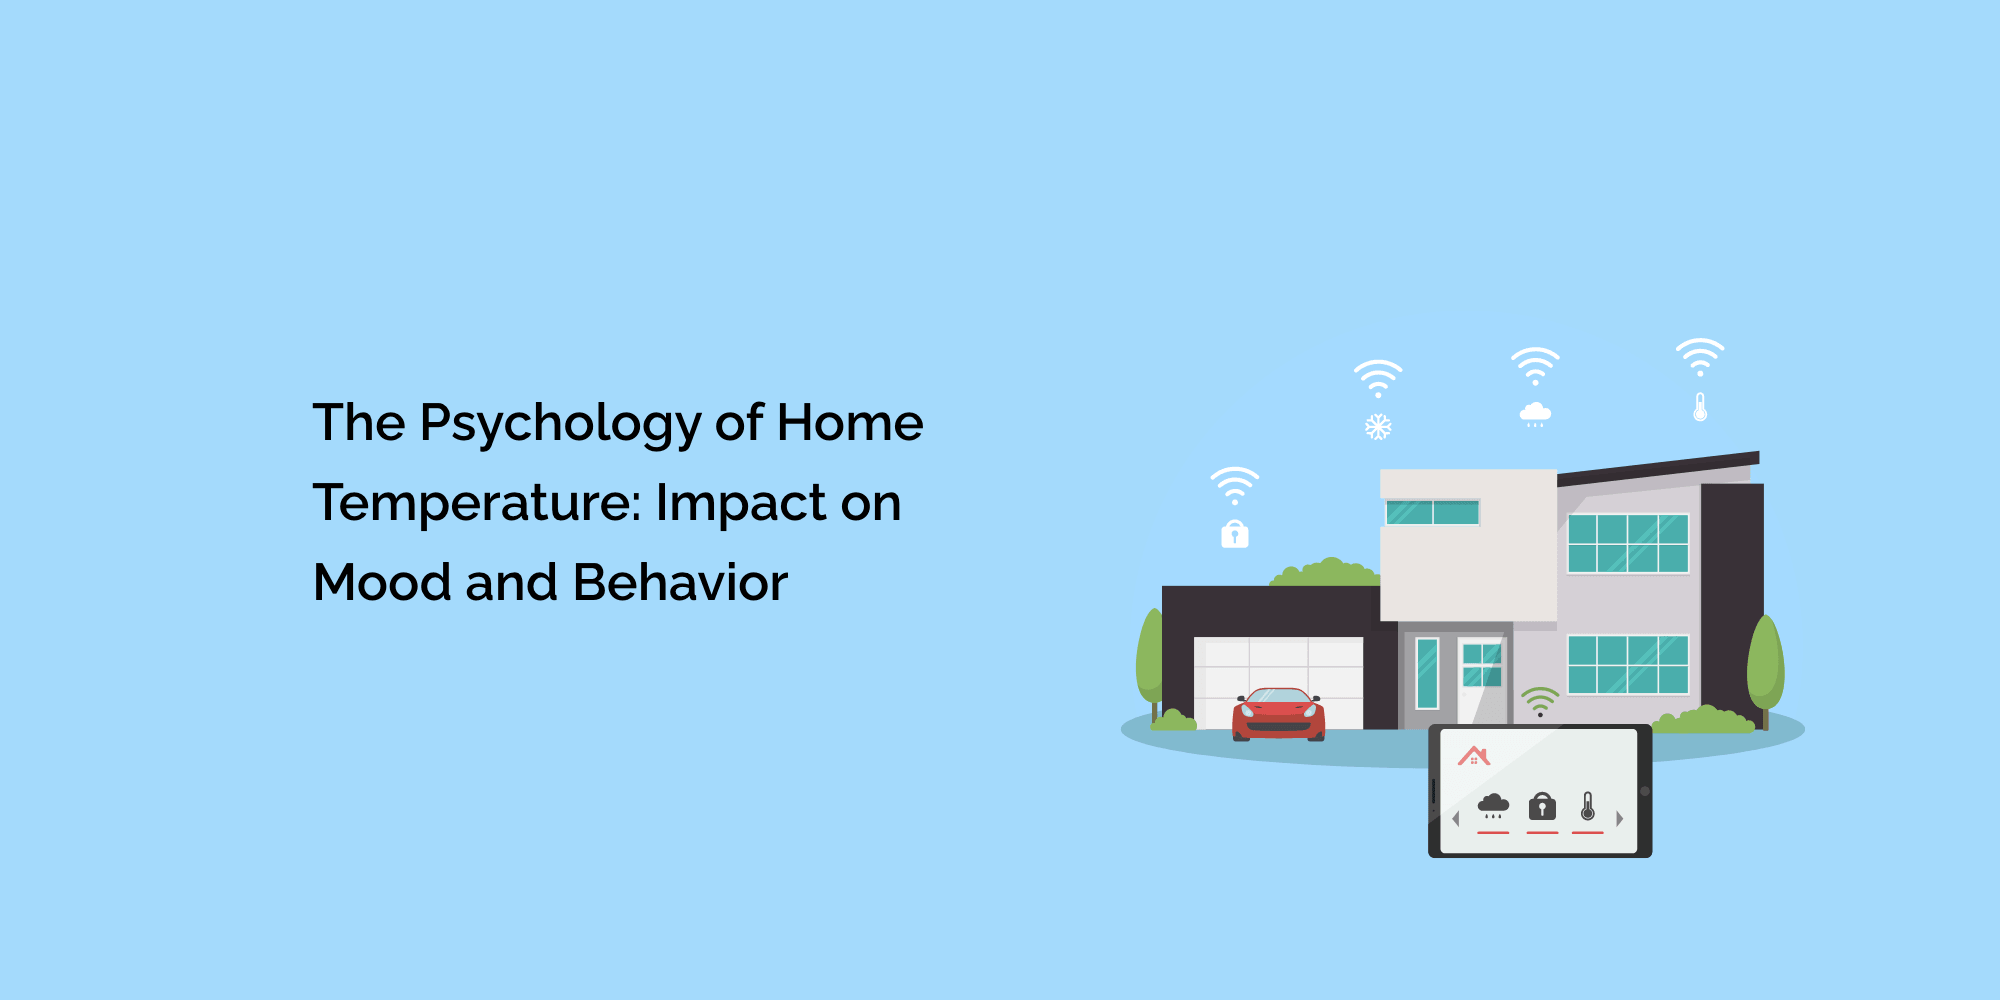 The Psychology of Home Temperature: Impact on Mood and Behavior